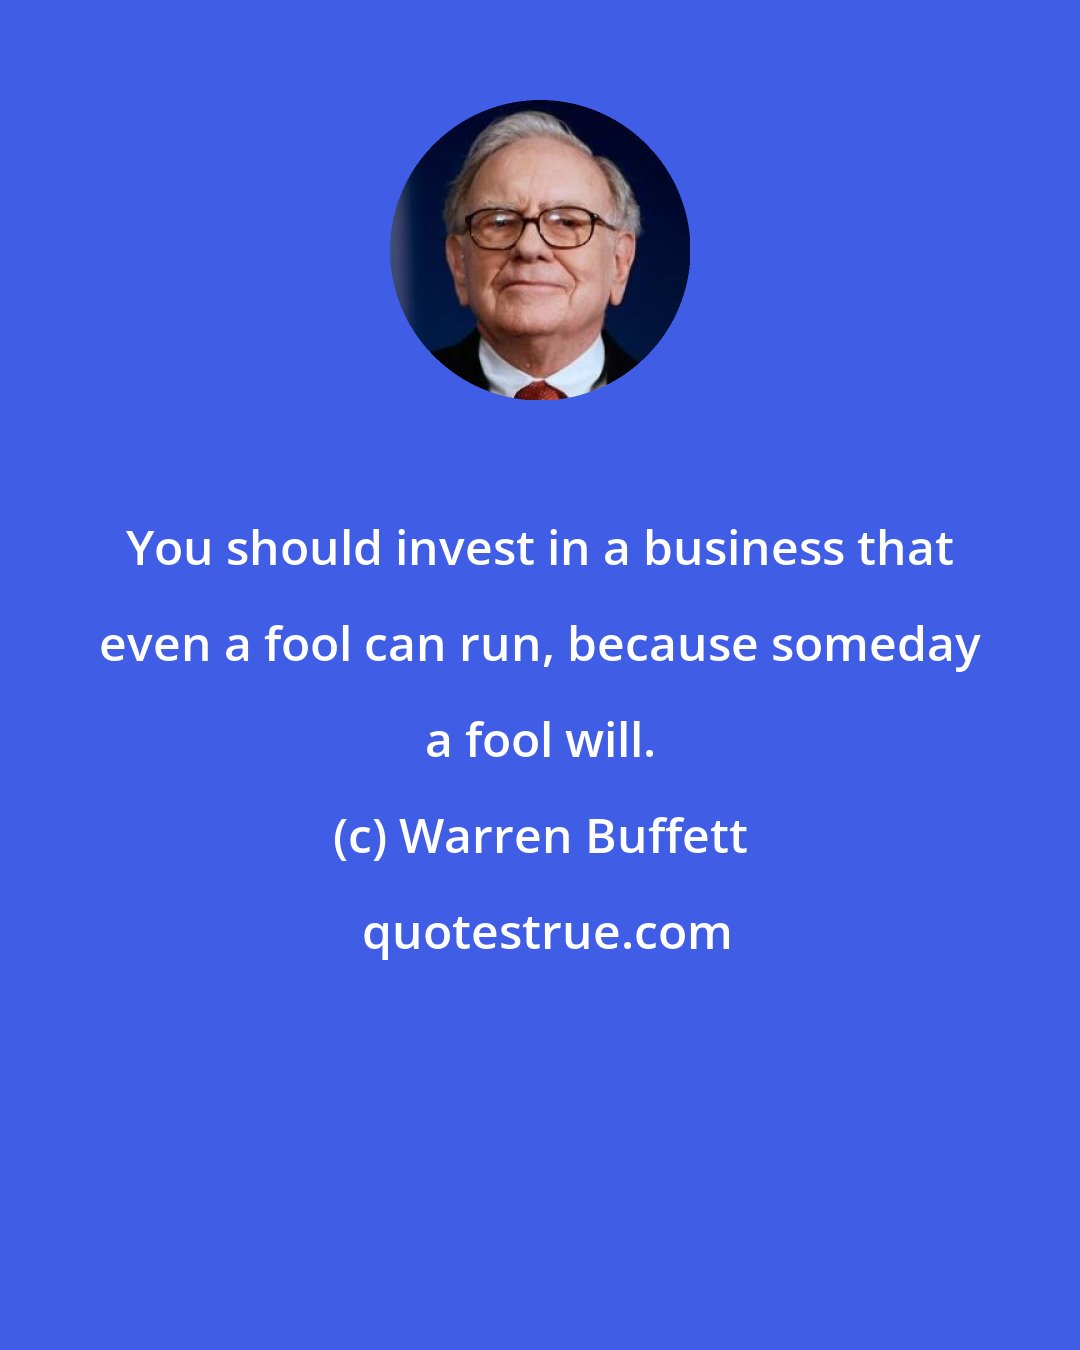 Warren Buffett: You should invest in a business that even a fool can run, because someday a fool will.